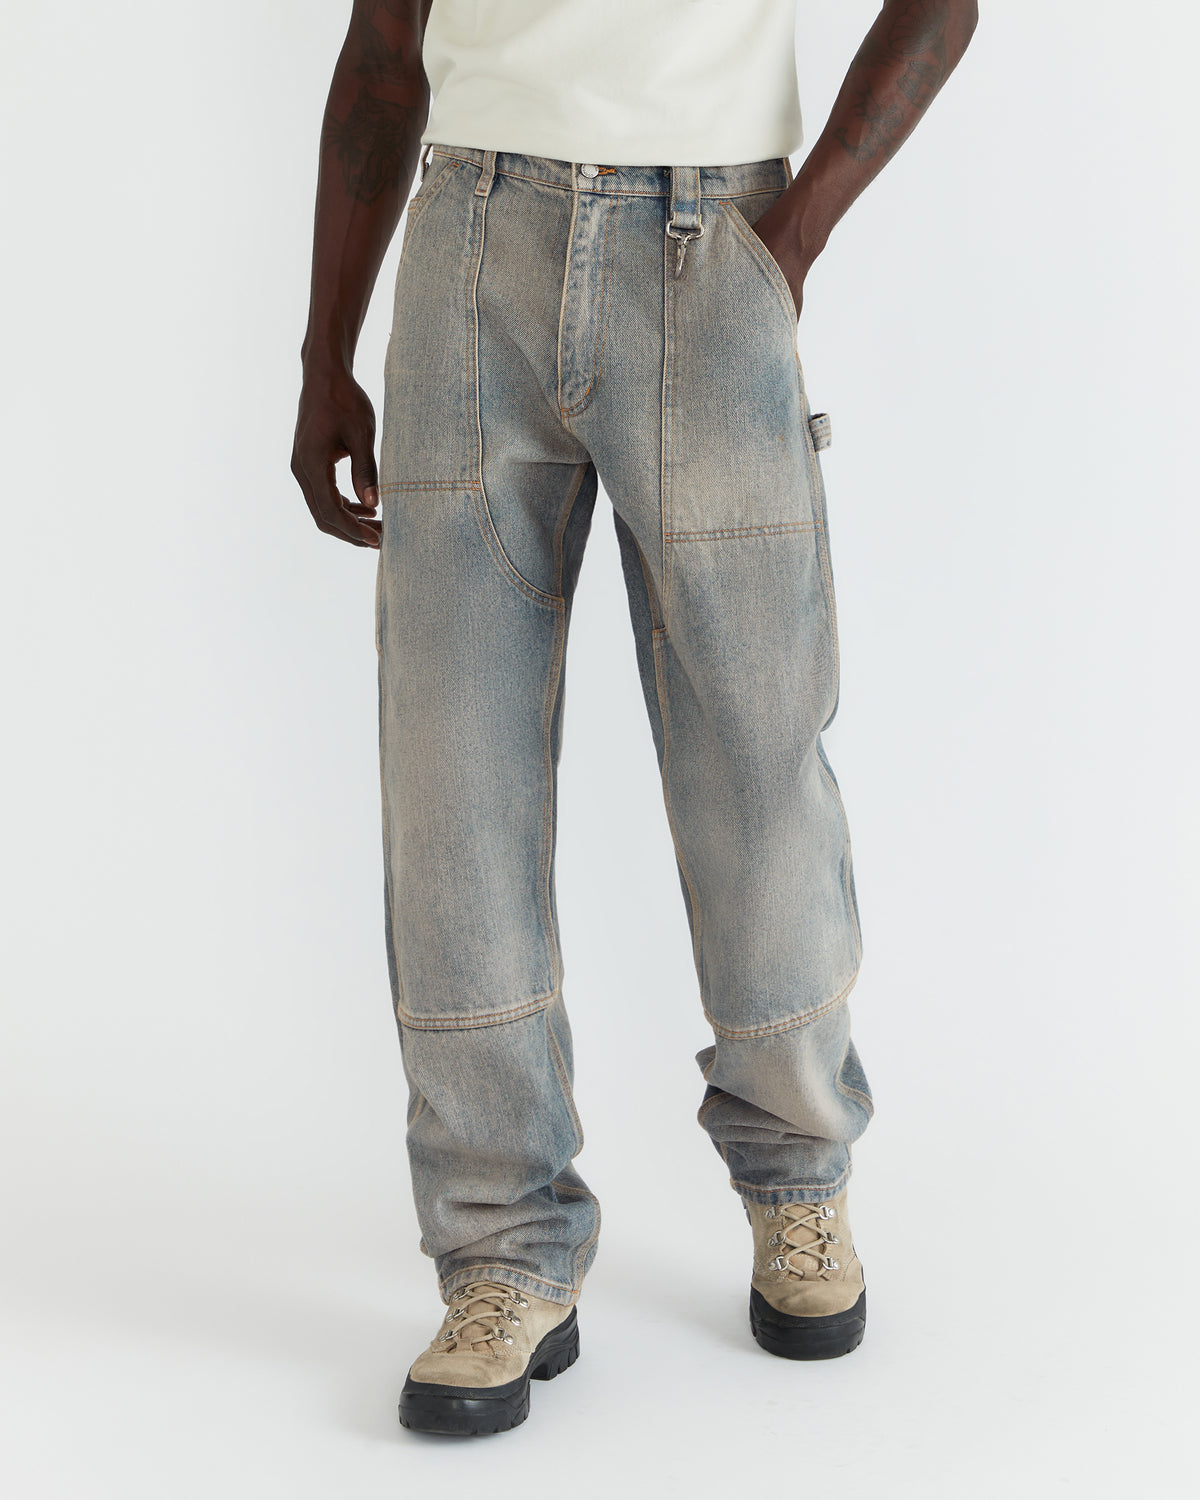 Double Knee Denim Trousers in Light wash, Trousers